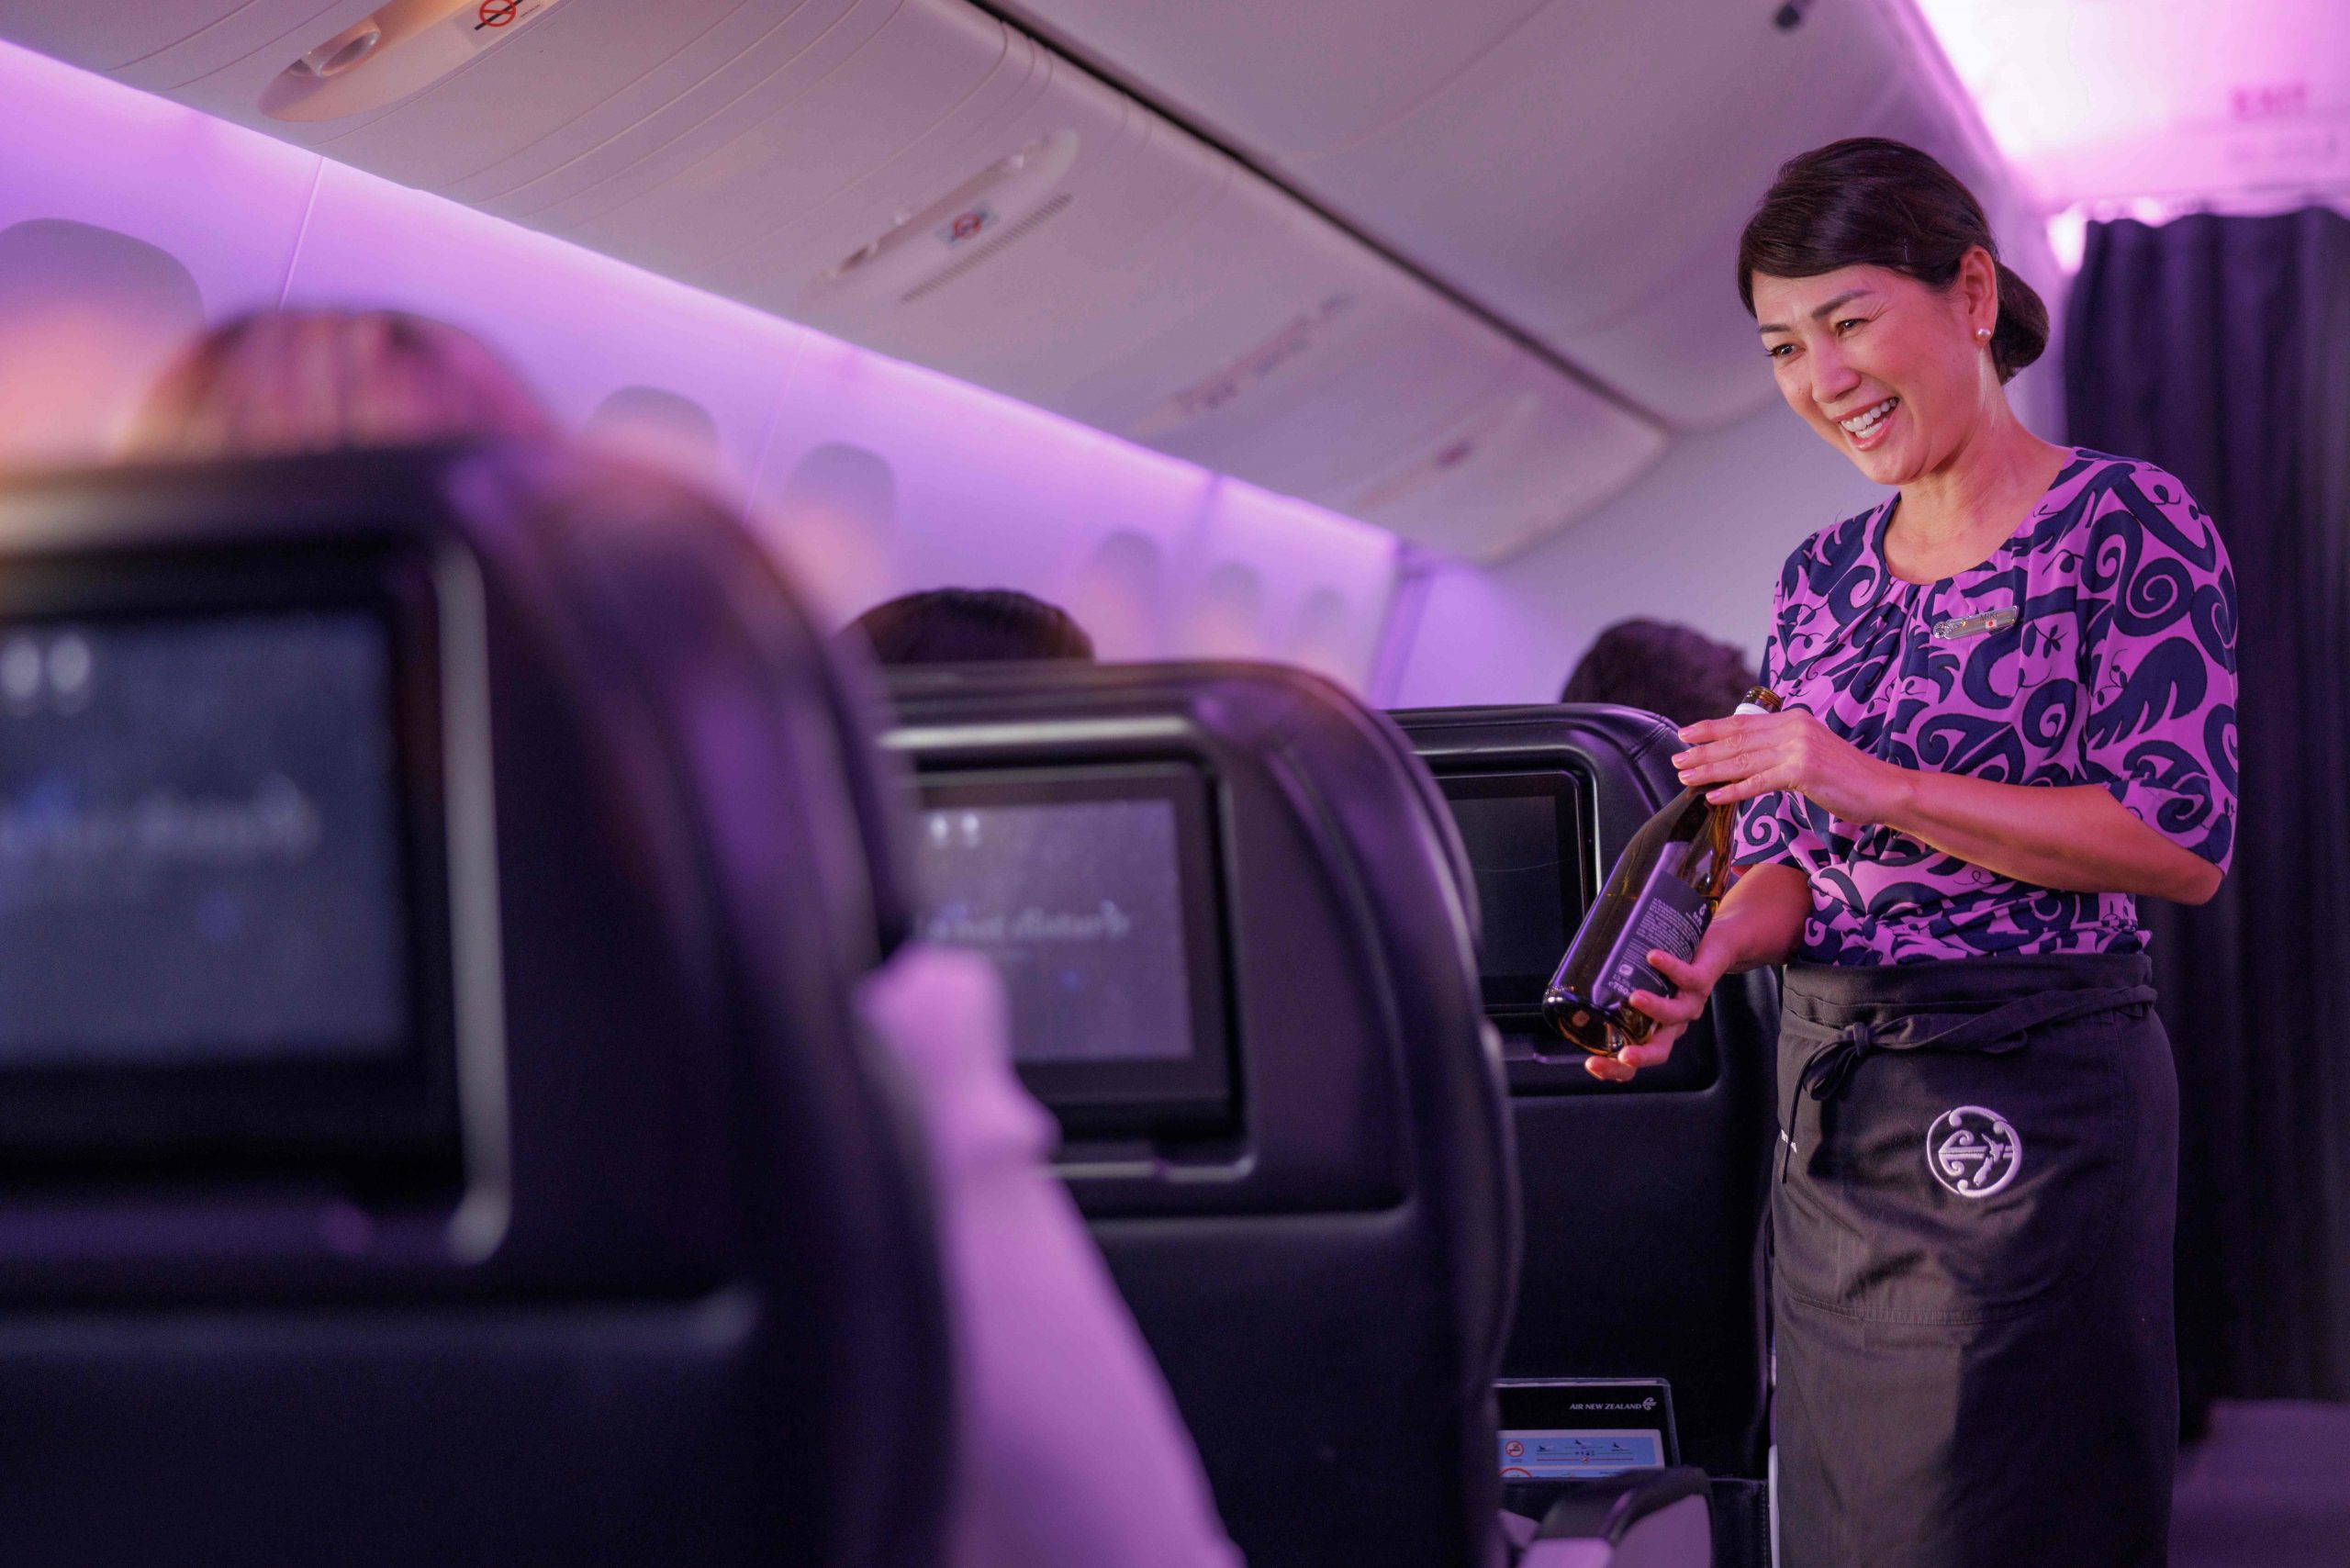 Air New Zealand to increase capacity to Japan by 30,000 seats to boost inbound tourism